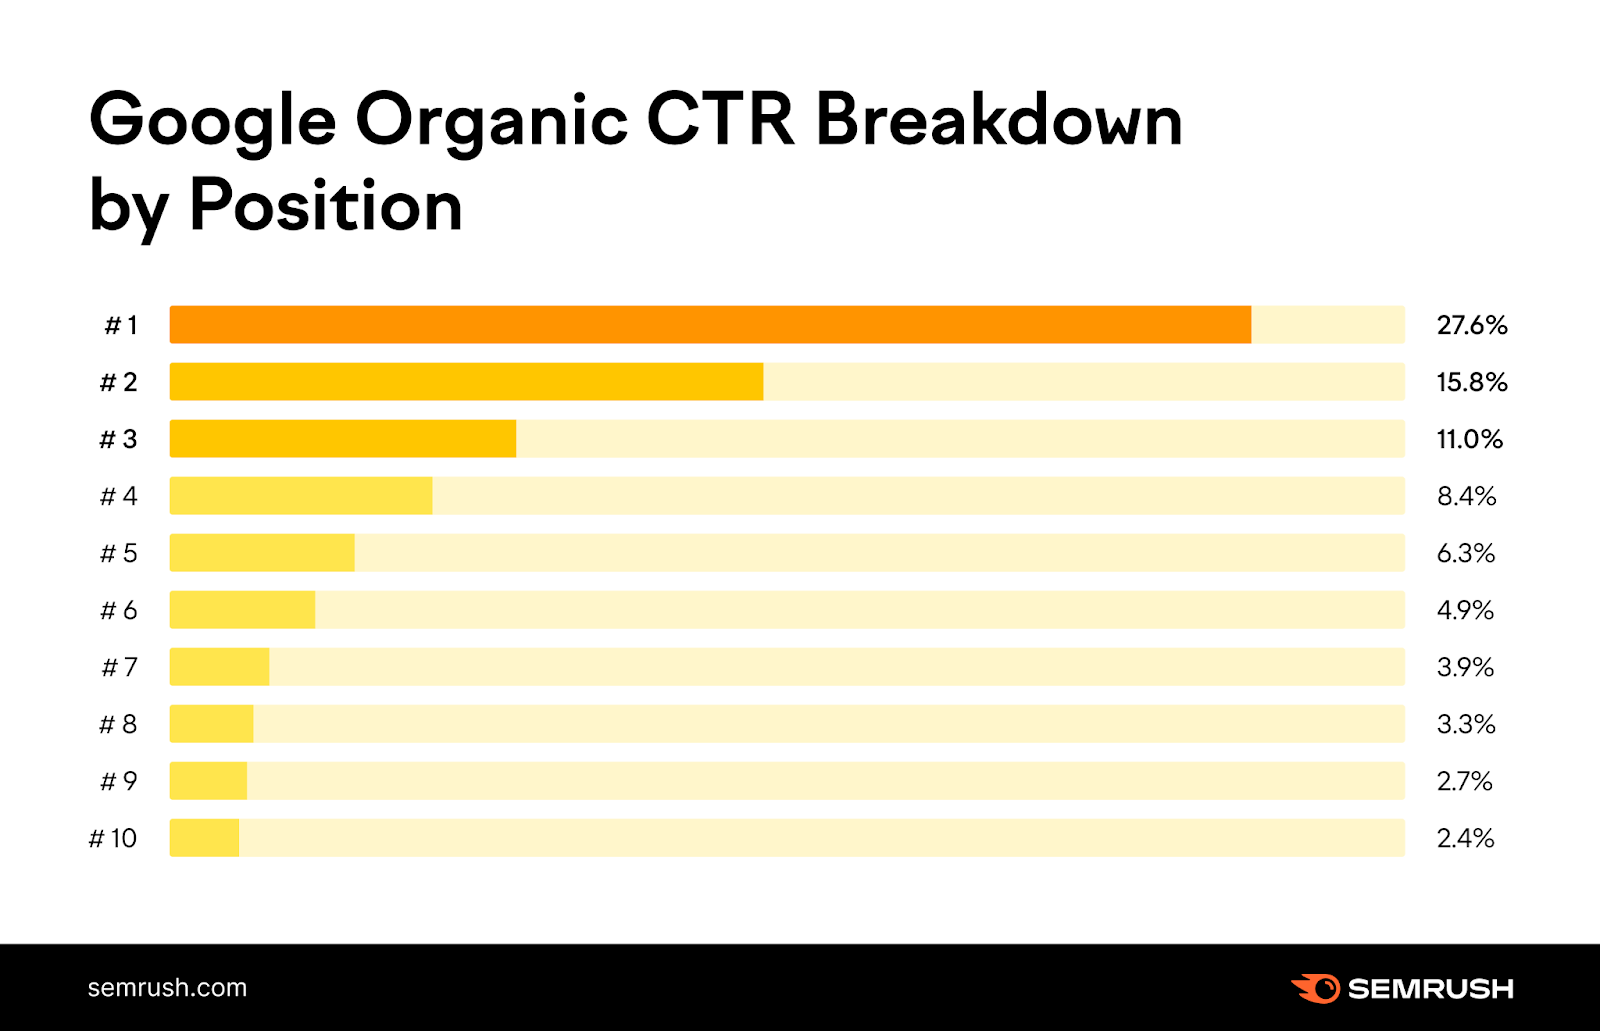 Google integrated  CTR breakdown by presumption   shows that a listing successful  presumption   1  has 27.6% CTR, presumption   2  has 15.8%, and presumption   3  has 11%